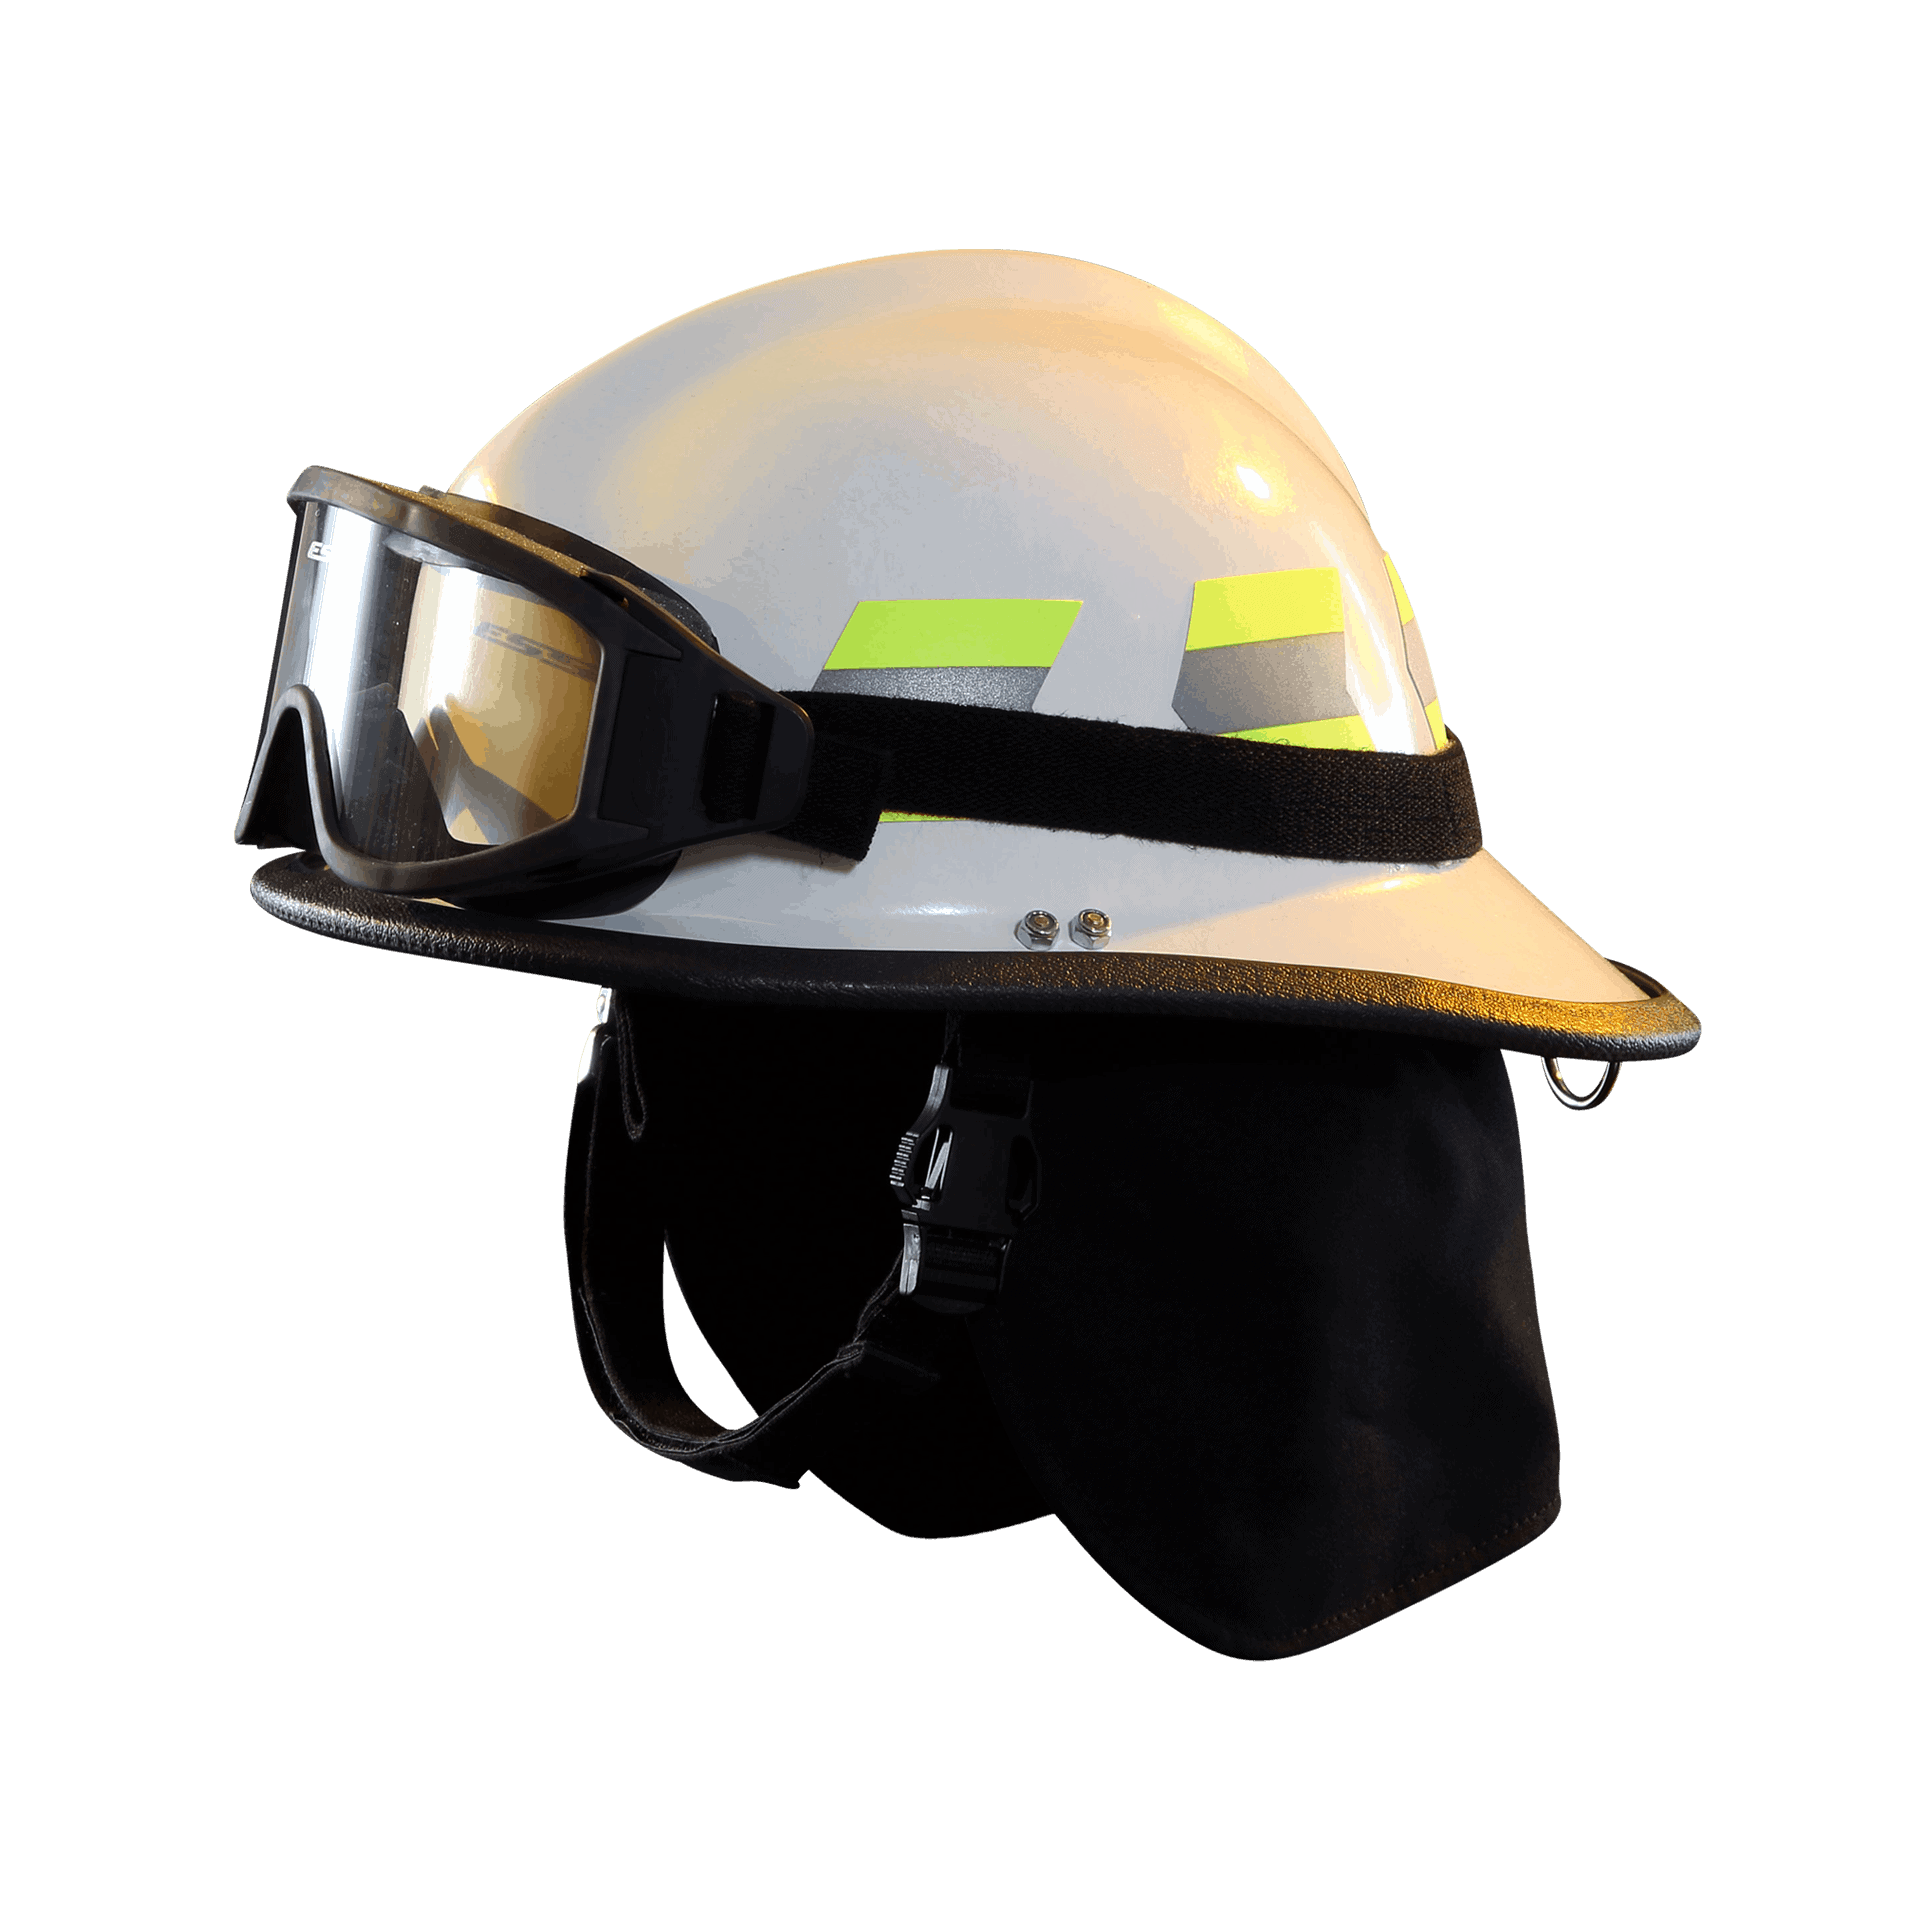 Fire-Dex Helmet-Modern (Standard & Deluxe)| The Fire Center | Fuego Fire Center | Store | FIREFIGHTER GEAR | FREE SHIPPING | Our Modern Structural Firefighting Helmets embody a lightweight and sleek design while offering unmatched protection for your most vital organ. Available with a matte finish in red, yellow, white or black.